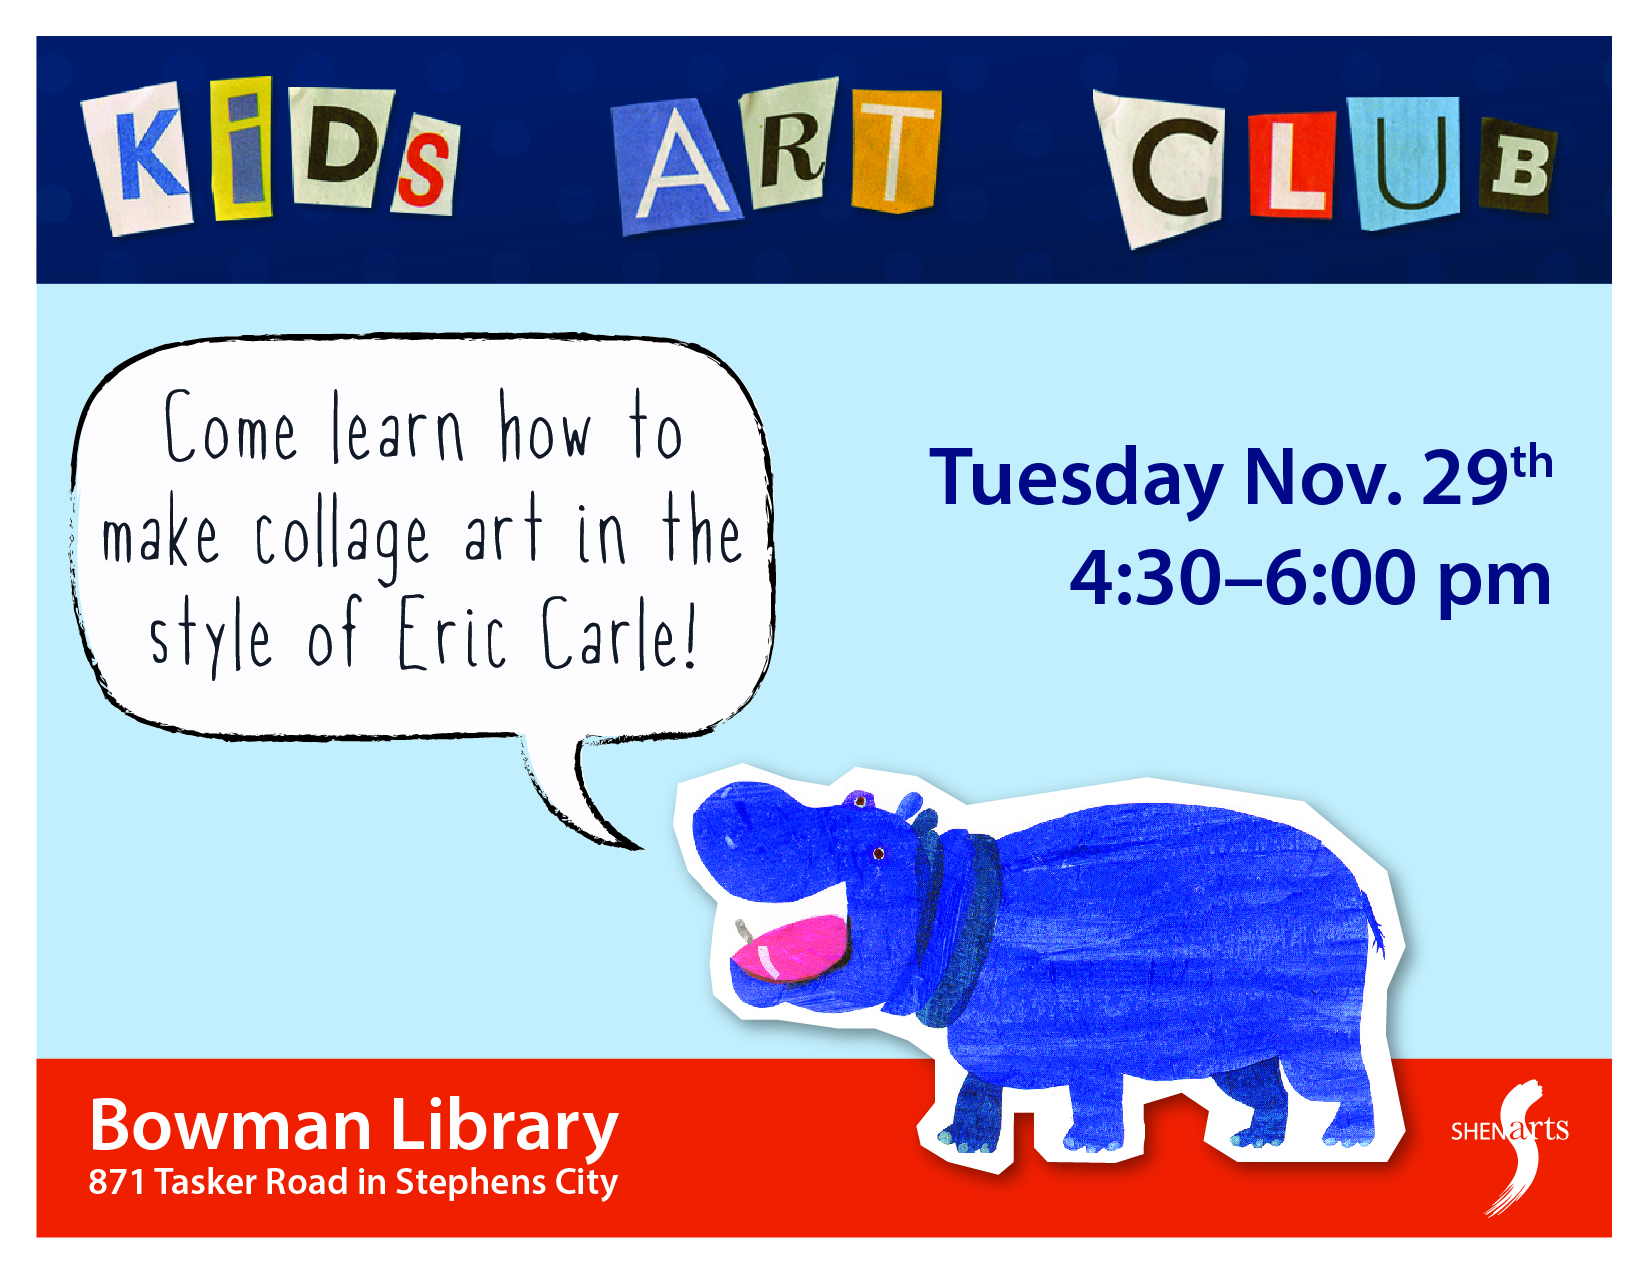 Kids Art Club promotional poster that shows a talking hippo